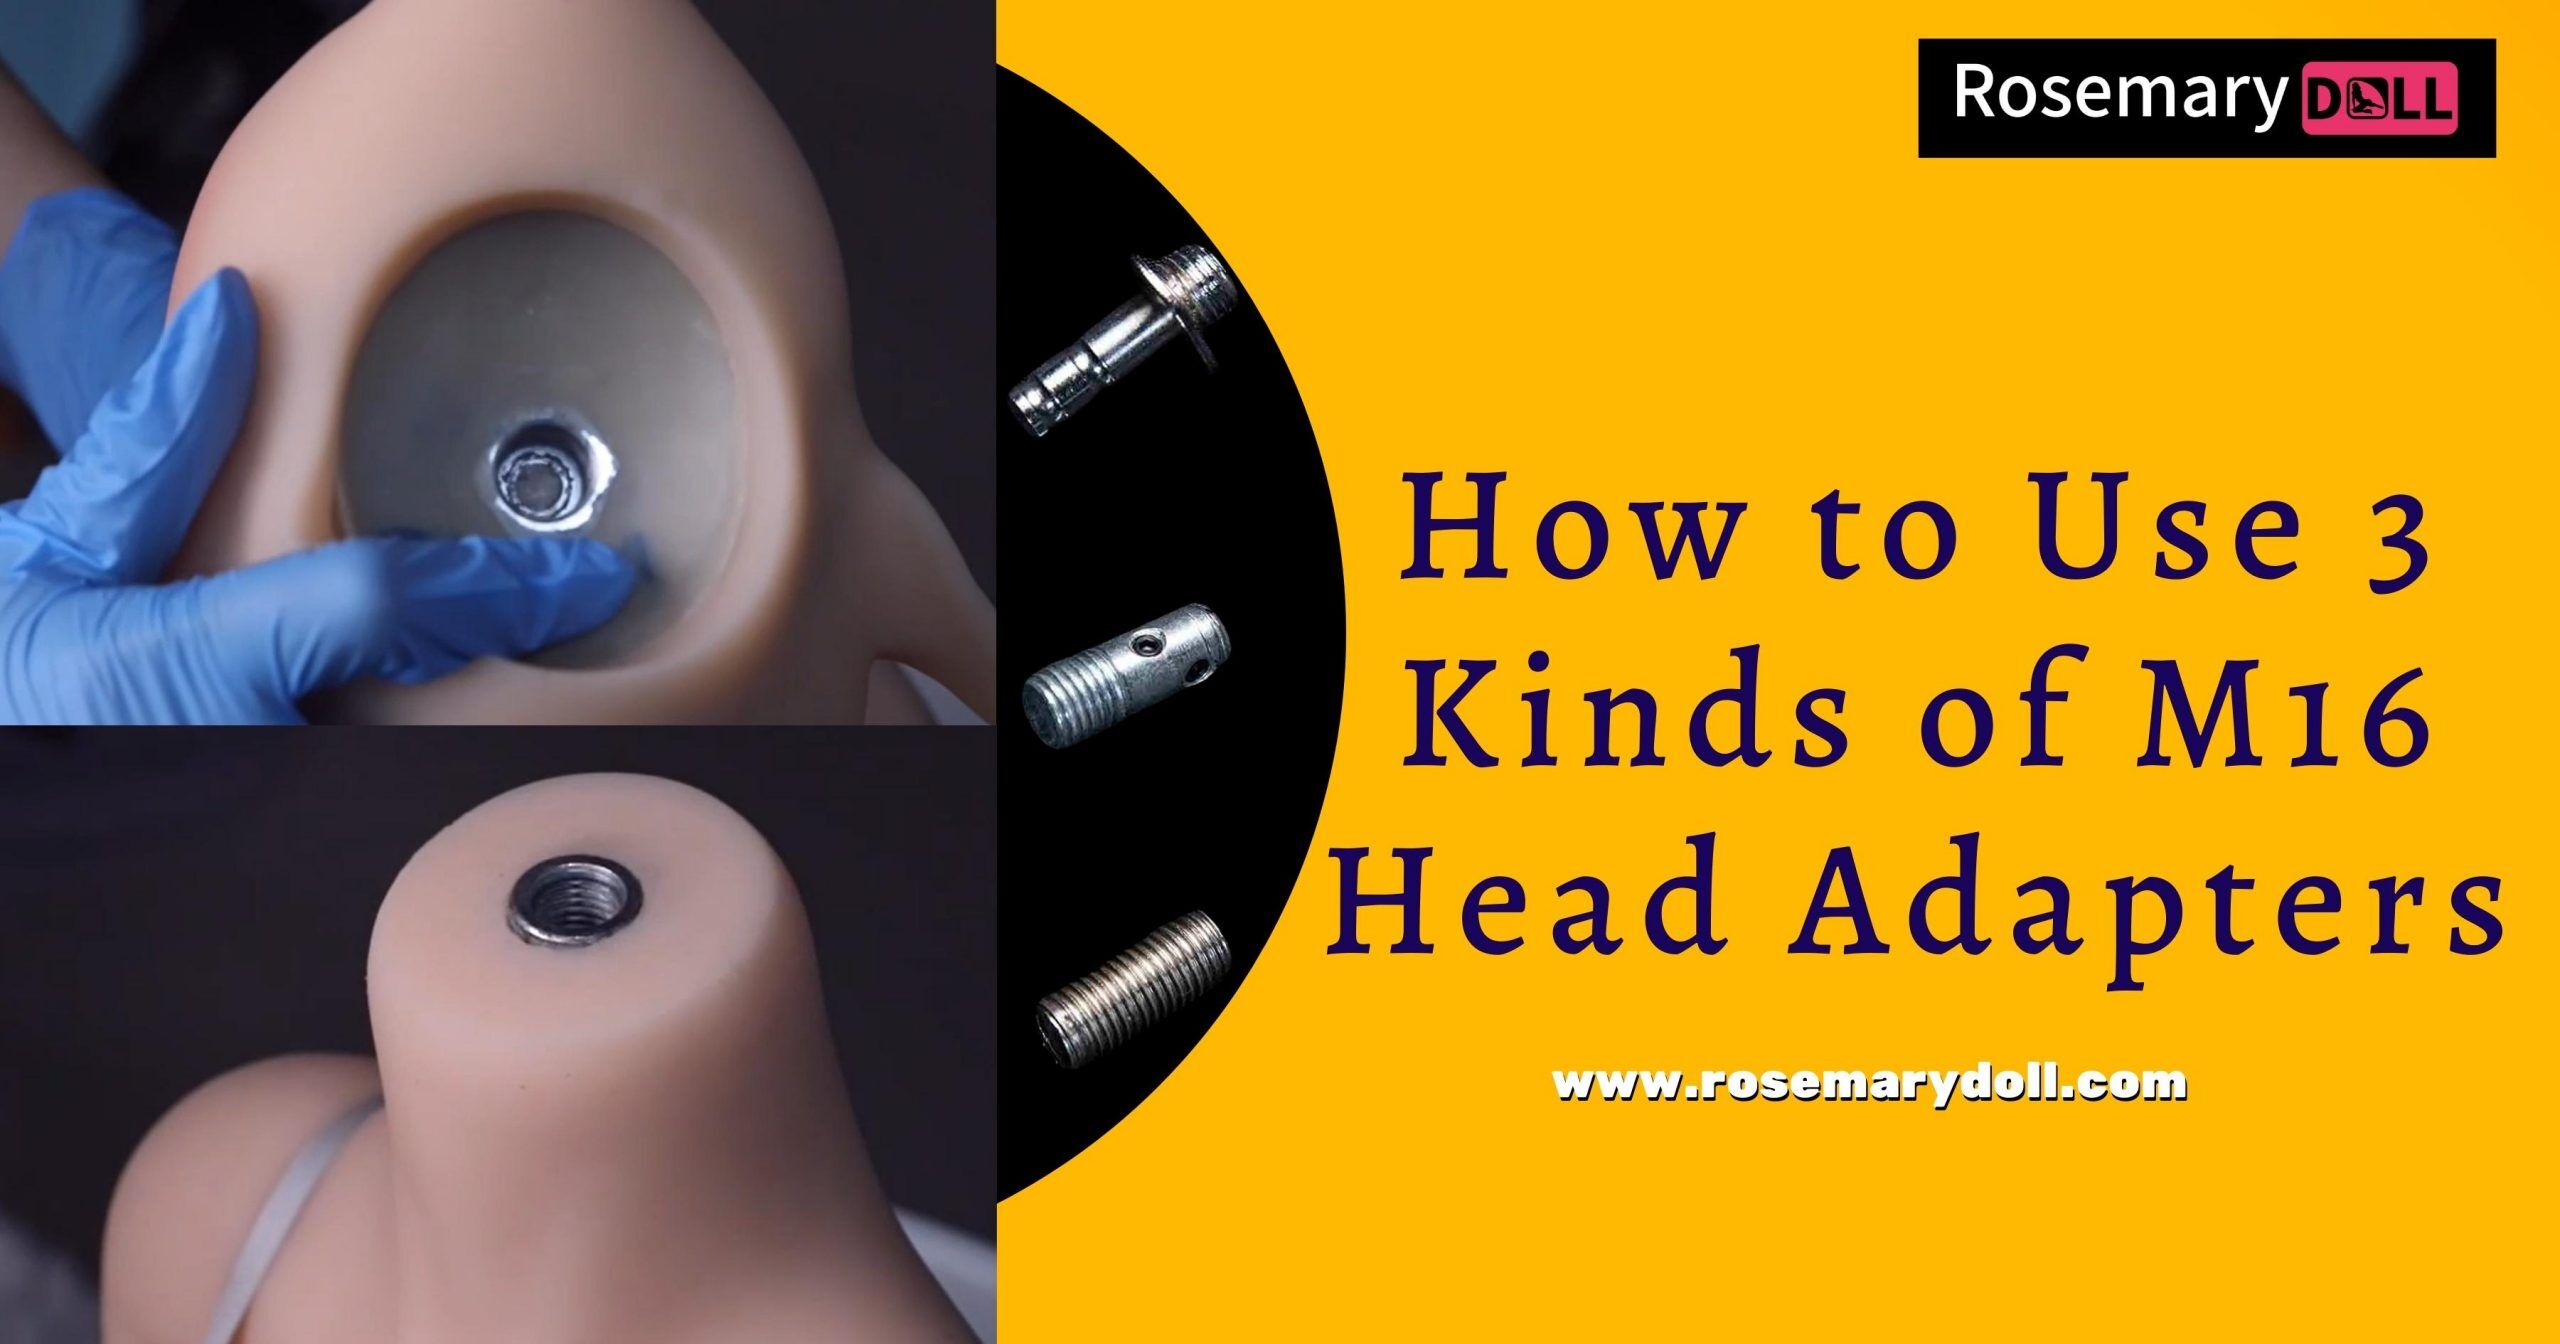 Learn more about three types of M16 Head Adapters of sex dolls.